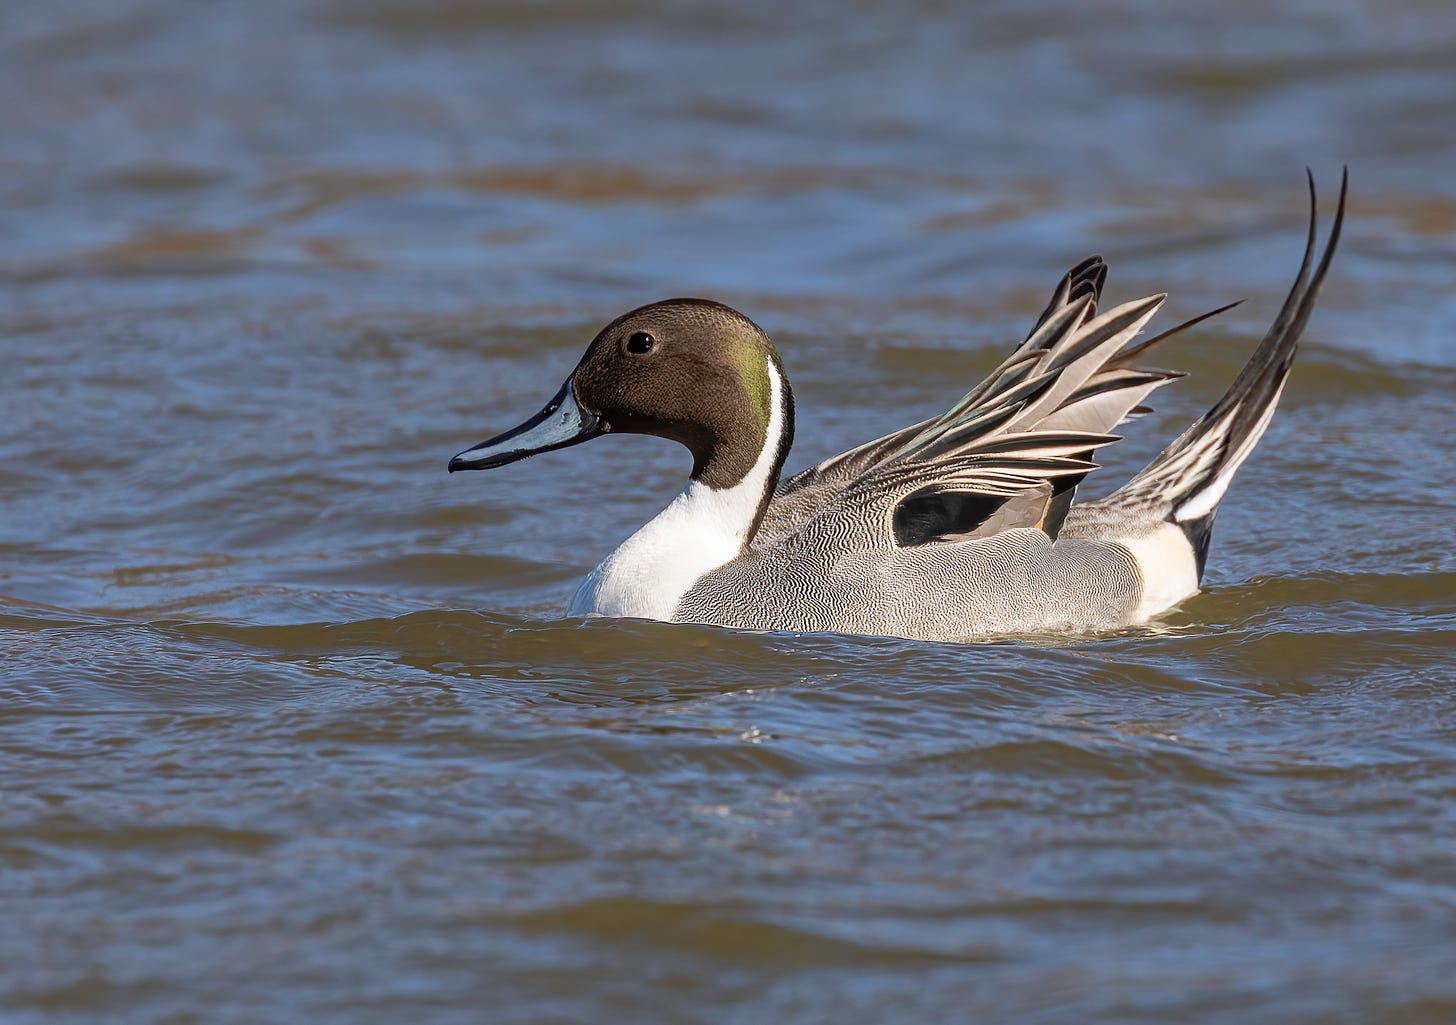 A male northern pintail floats on the water. He has a dark head, but his bright white feathers on his breast swoop up onto the back of his neck and head. His body feathers are an incredibly fine pattern of black and white wavy lines. His tail feathers are very long and point up. He is very elegant looking!